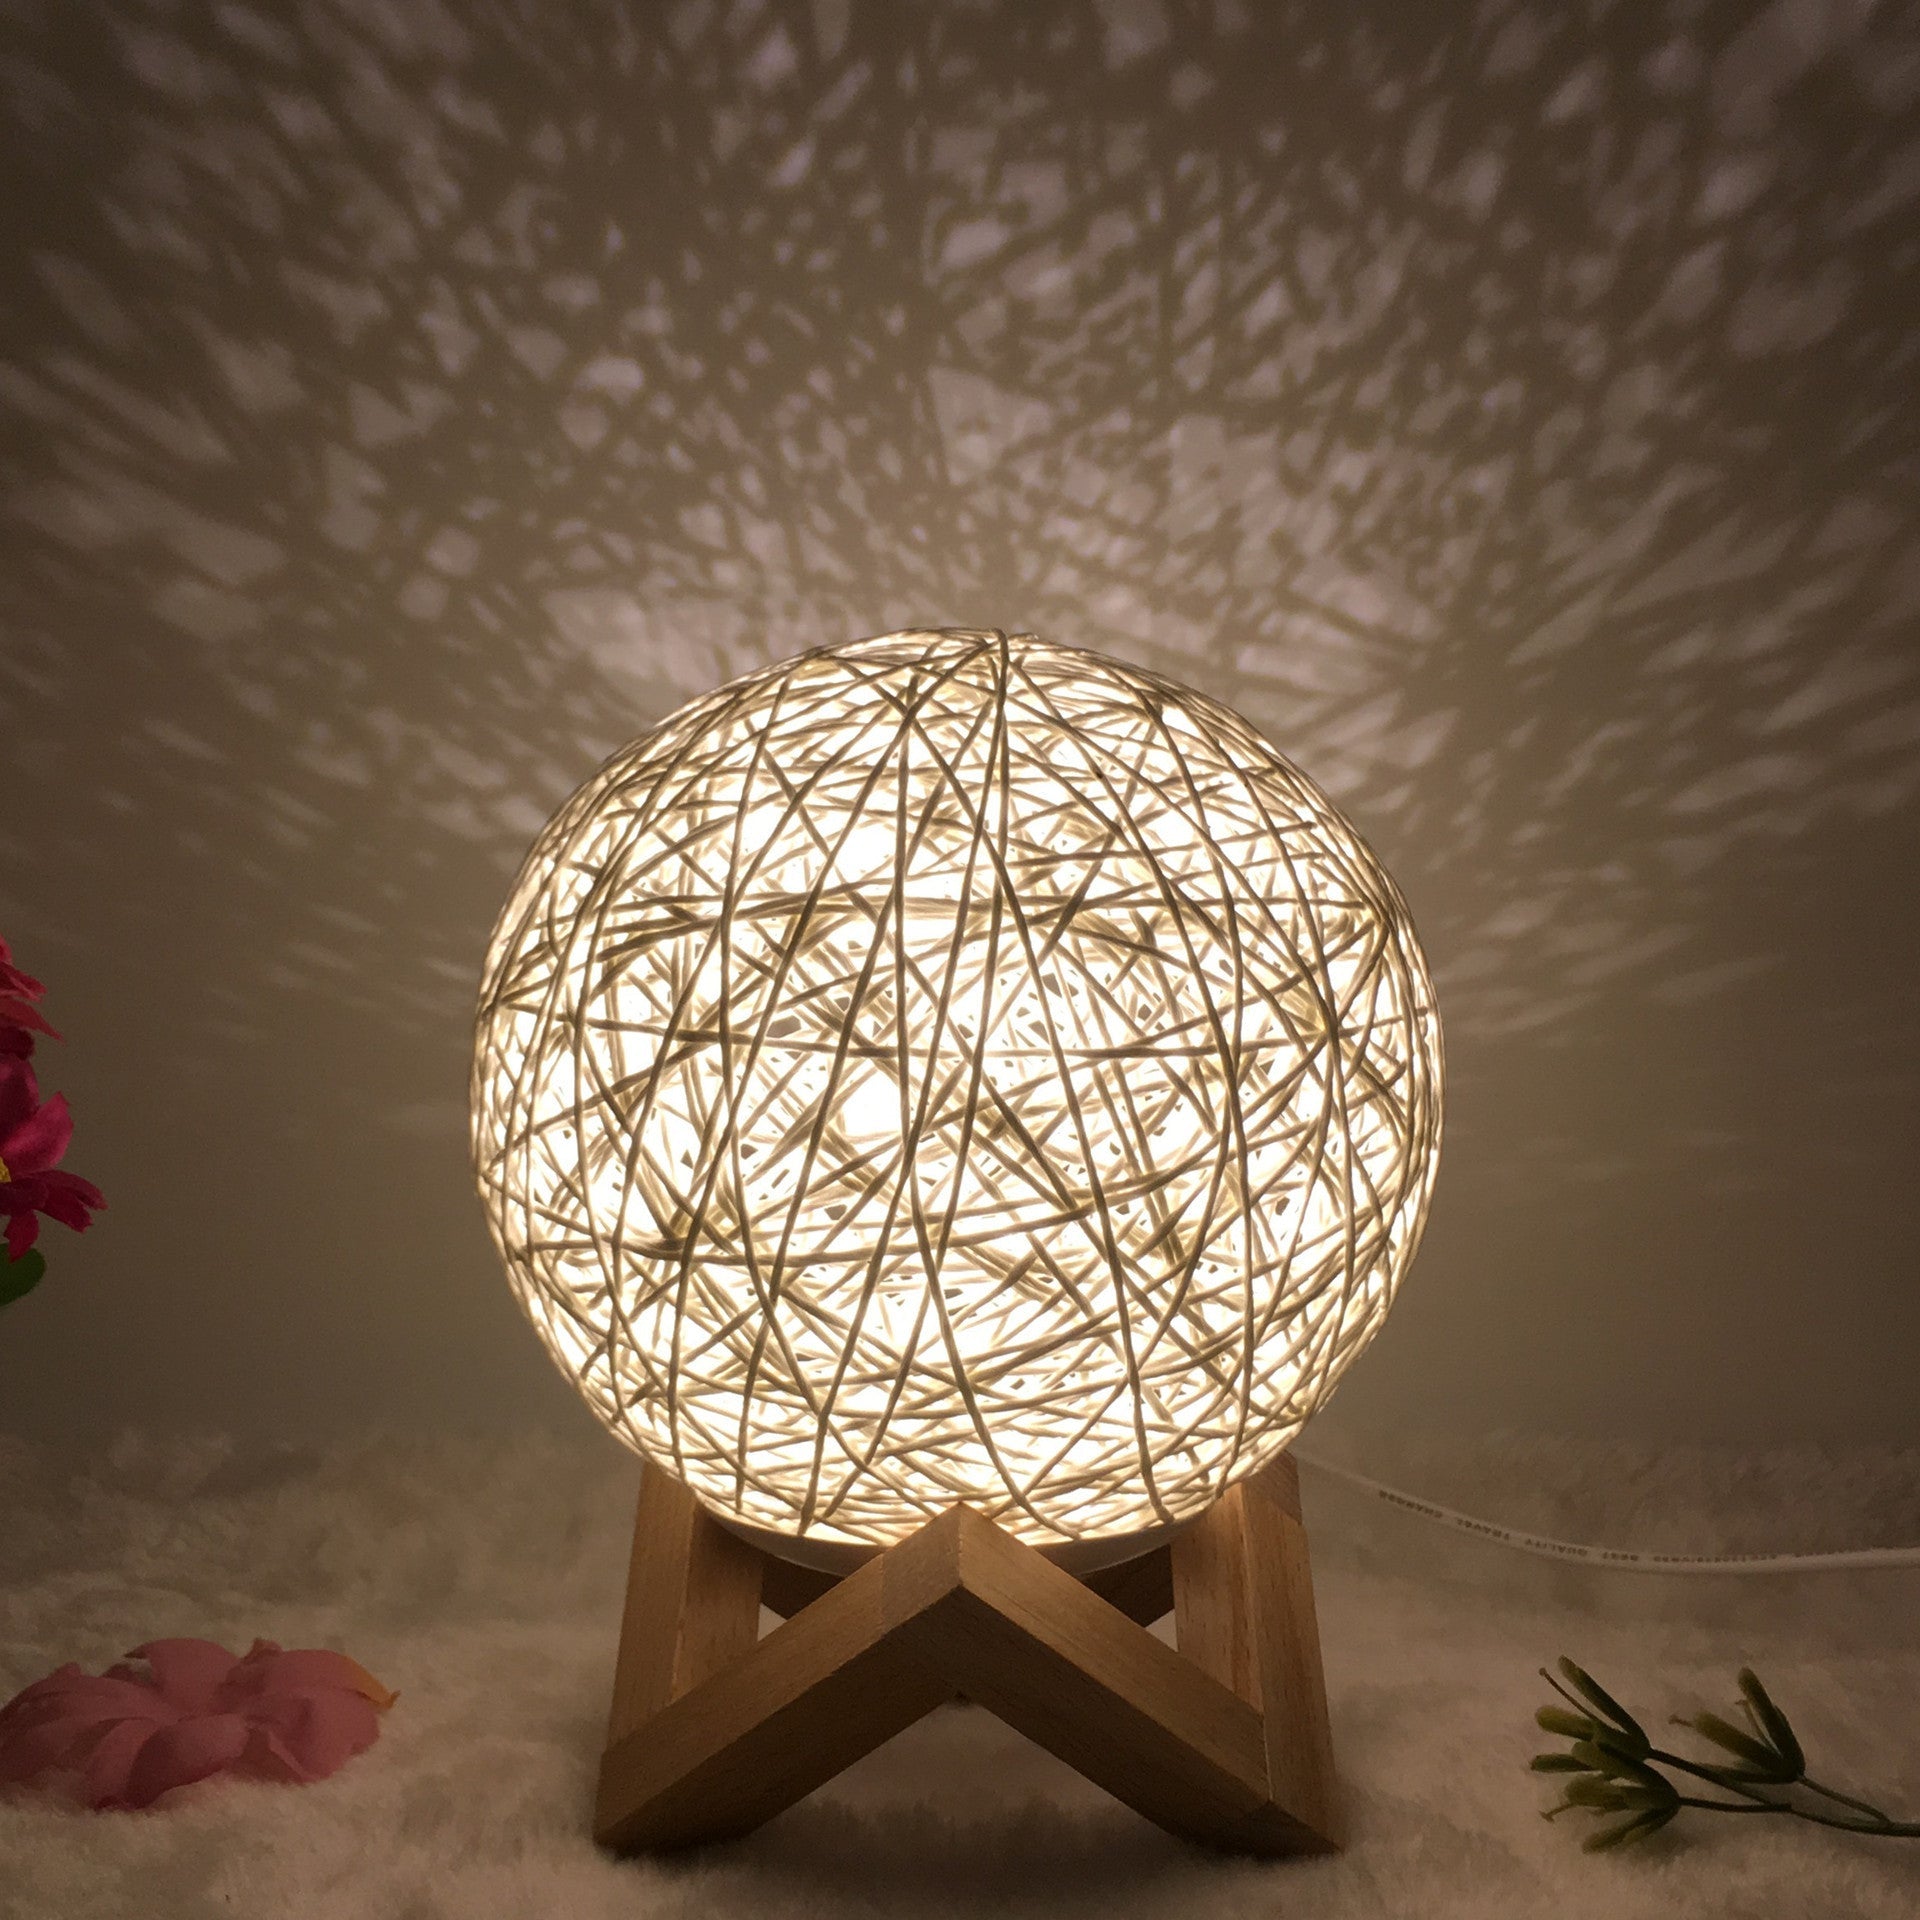 Amazon Hot Selling Creative Linen Table Lamp Novel and Unique LED Intelligent USB7 Color RGB16 Color Remote Control Rattan Ball Lamp | Decor Gifts and More